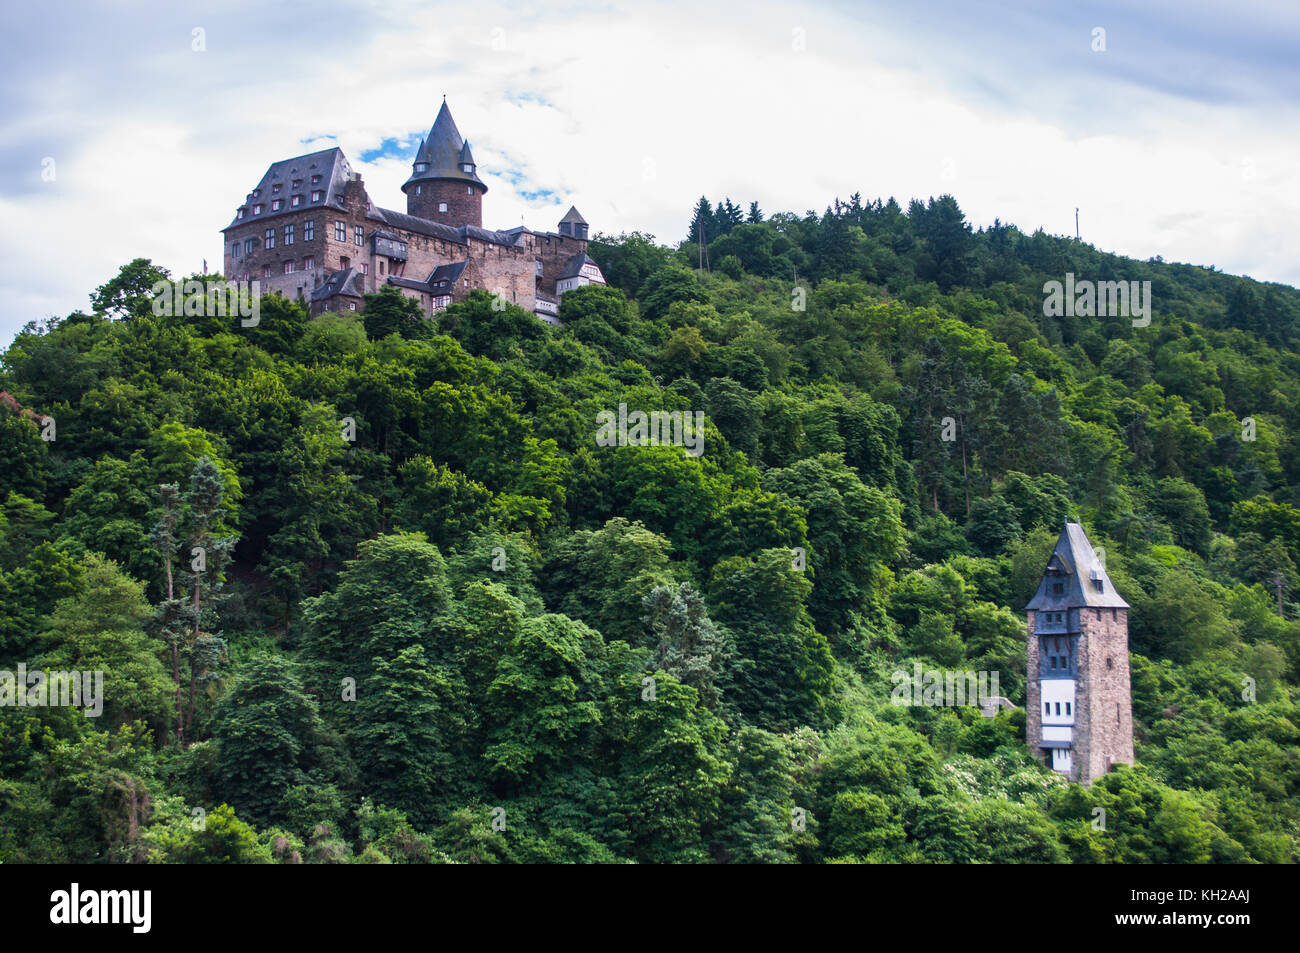 Bacharach located in Germany Stock Photo